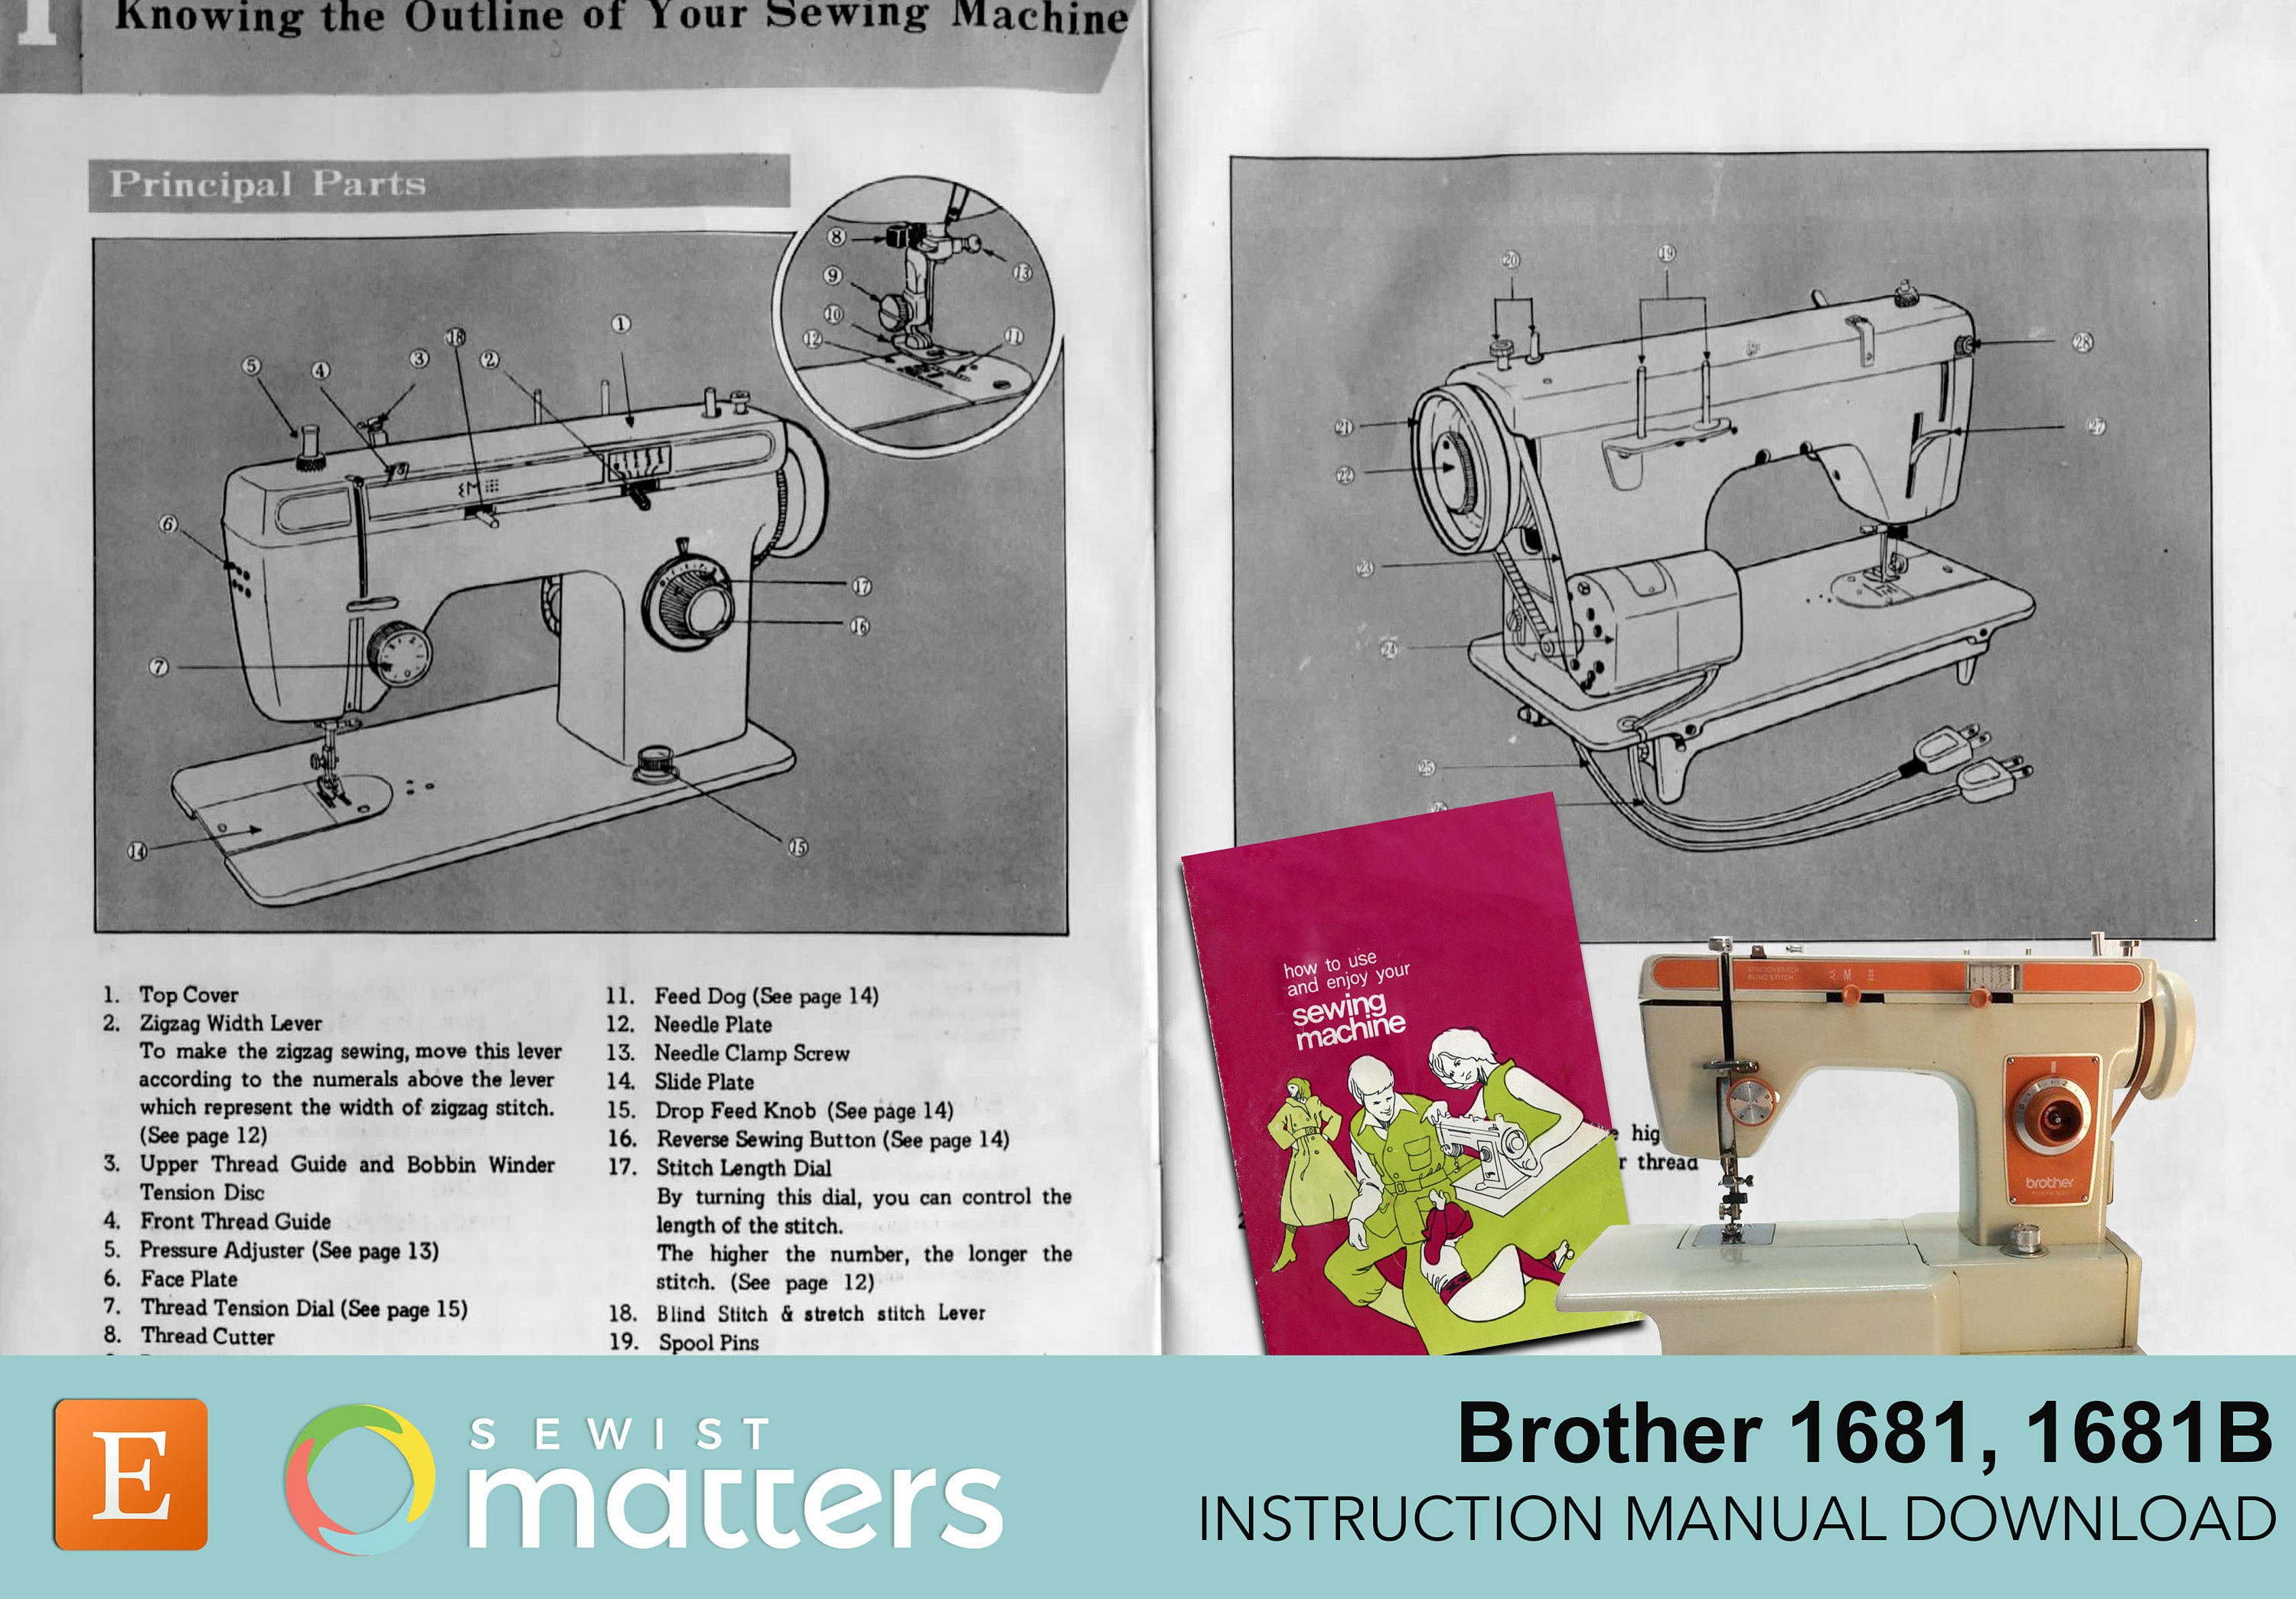 Ultimate Brother Sewing Machine Operation Parts Repair Service manual PDF  on DVD